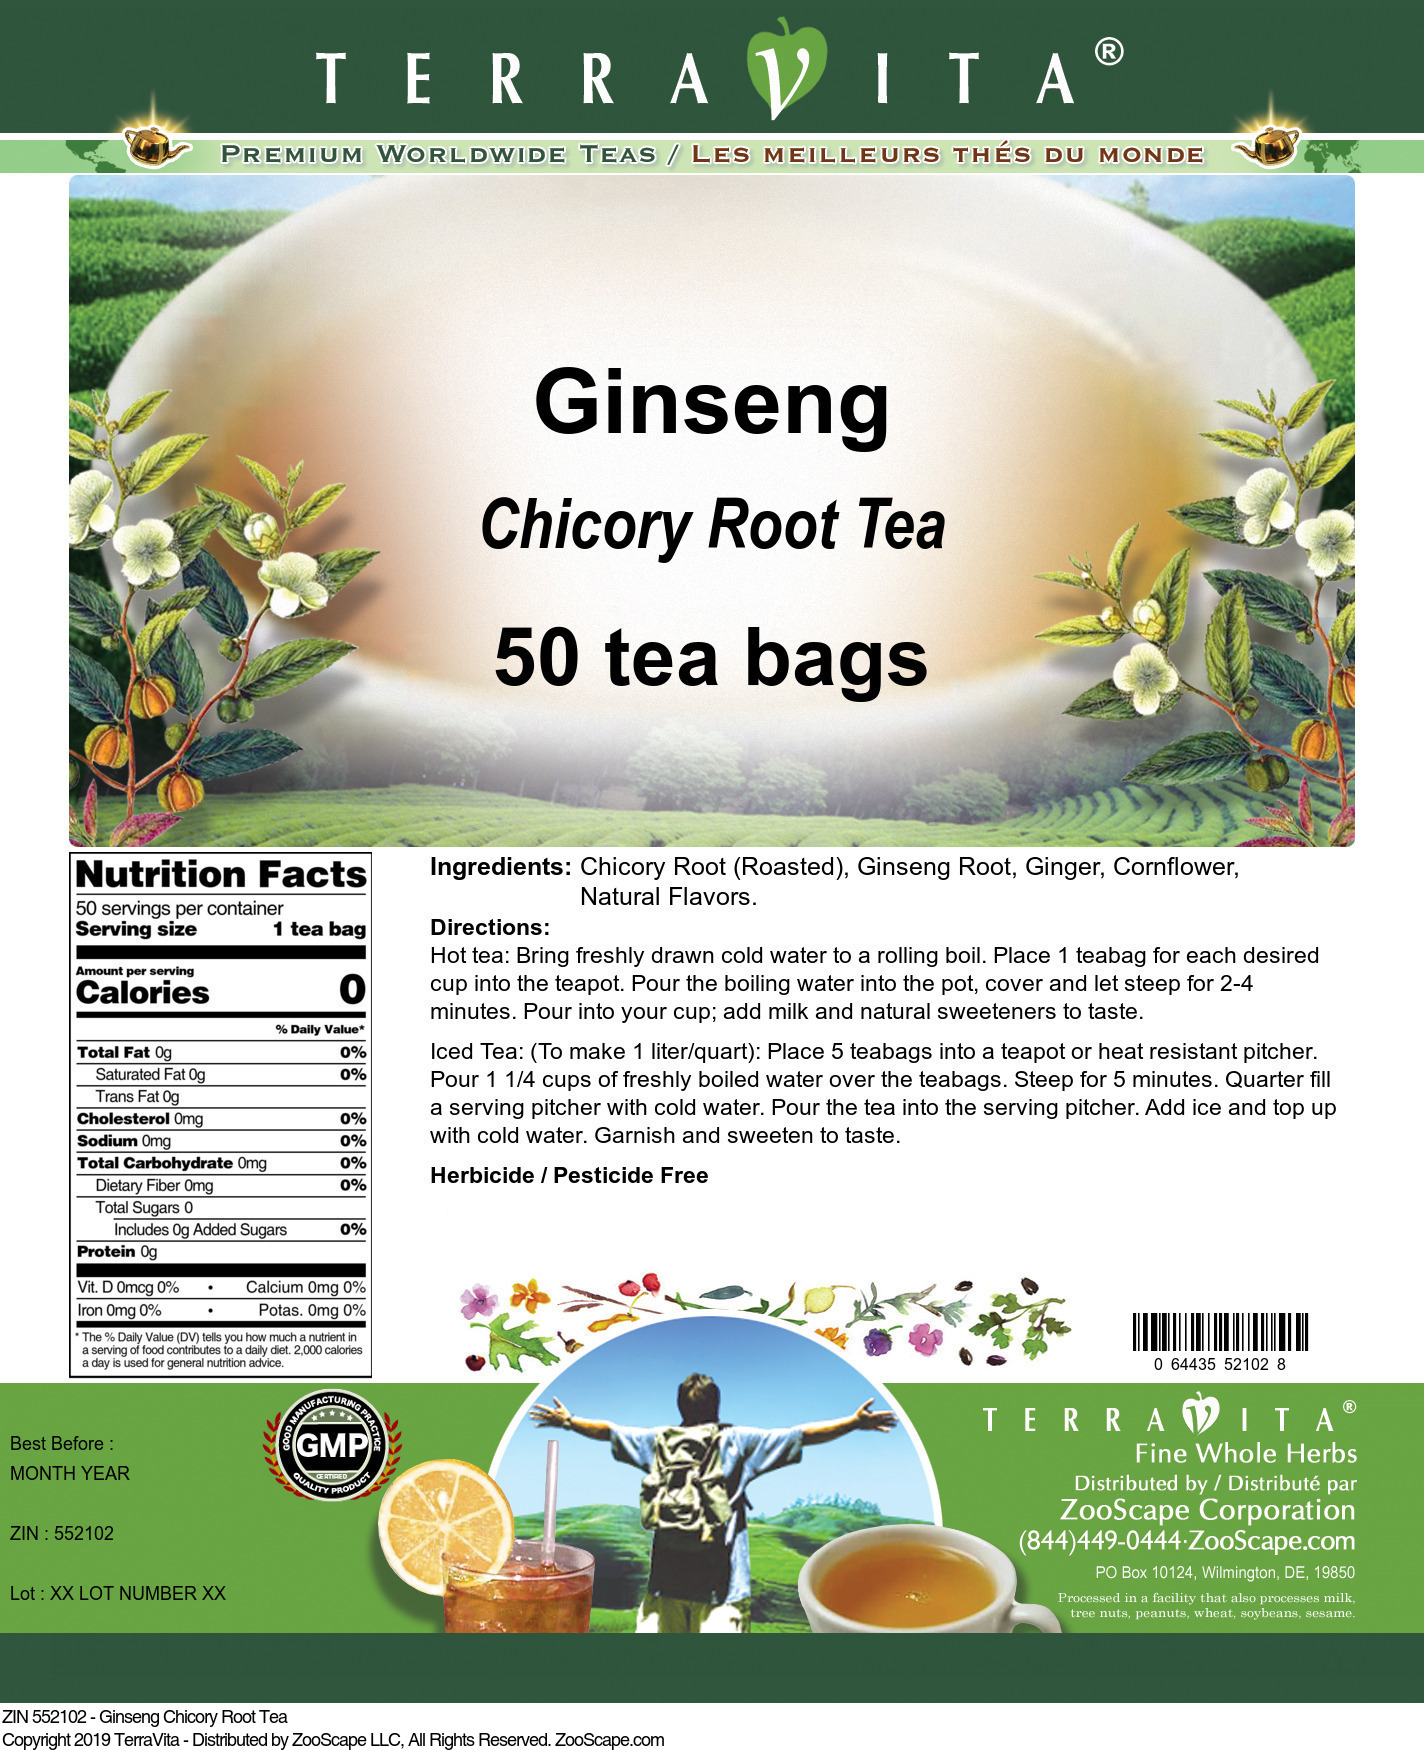 Ginseng Chicory Root Tea - Label